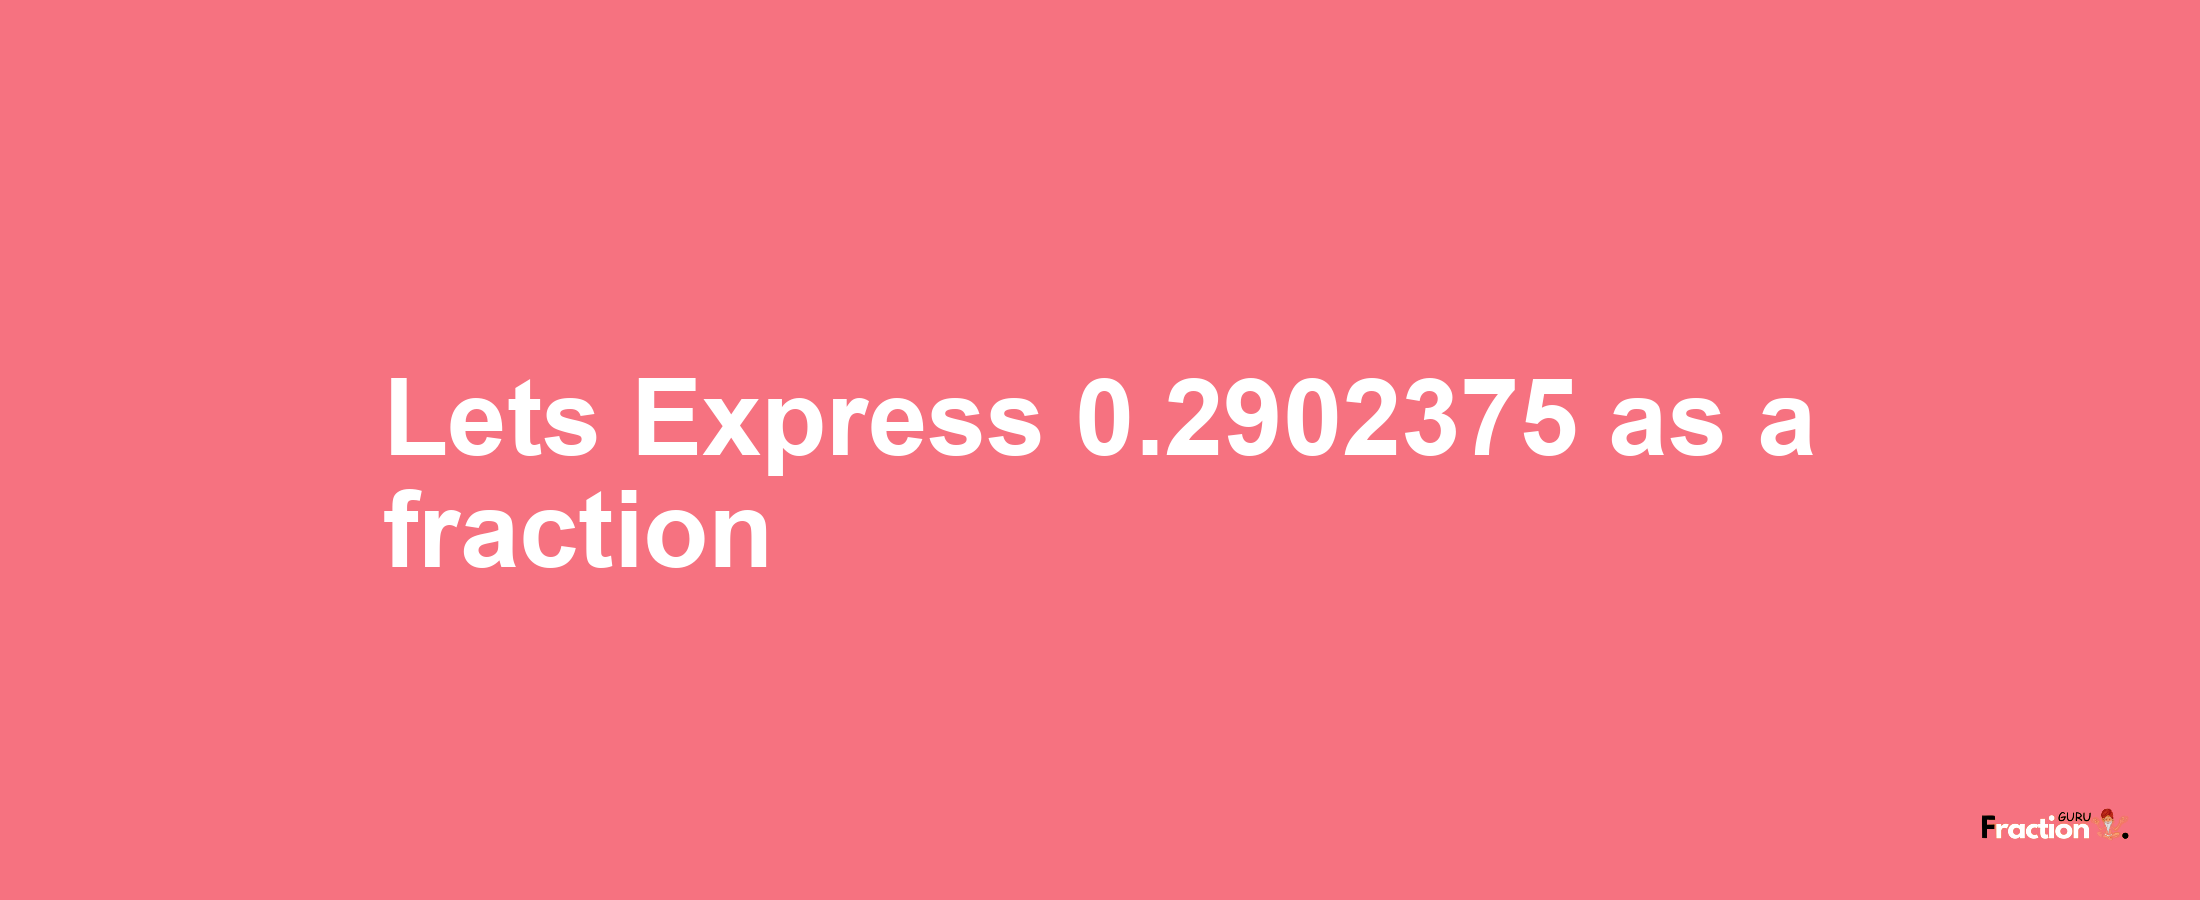 Lets Express 0.2902375 as afraction